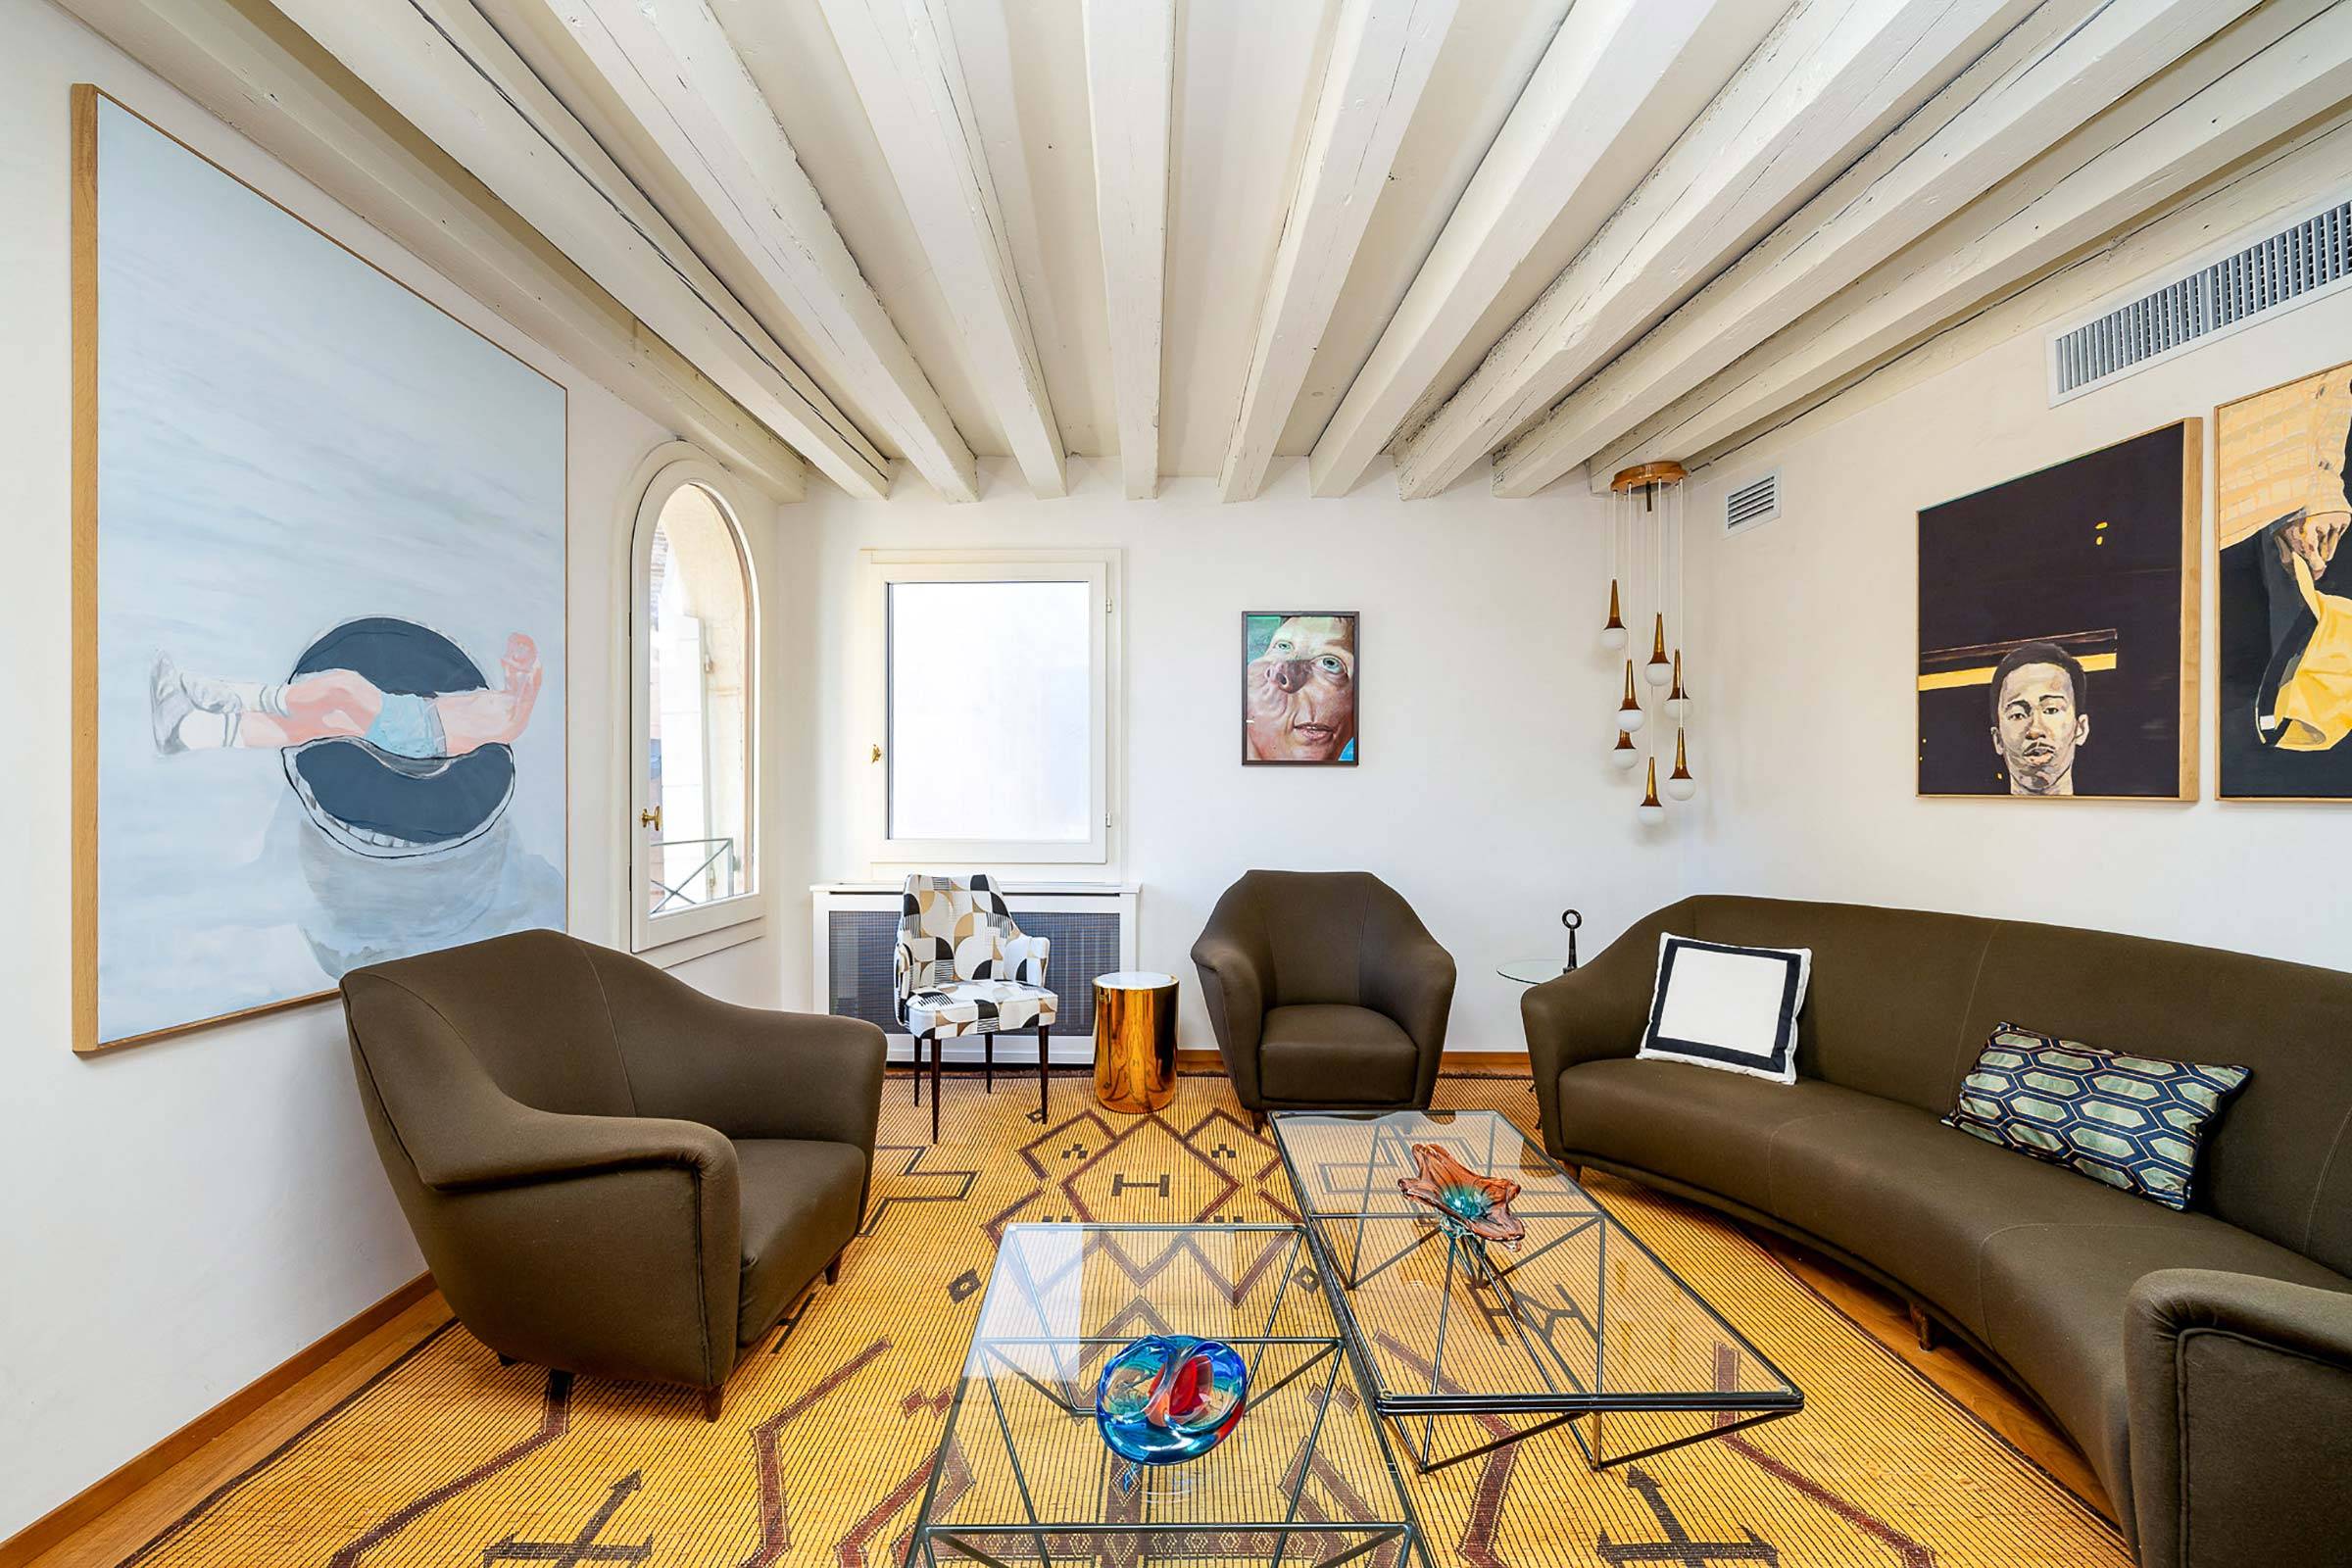 the owner is passionate about art and design, the apartment is her gallery